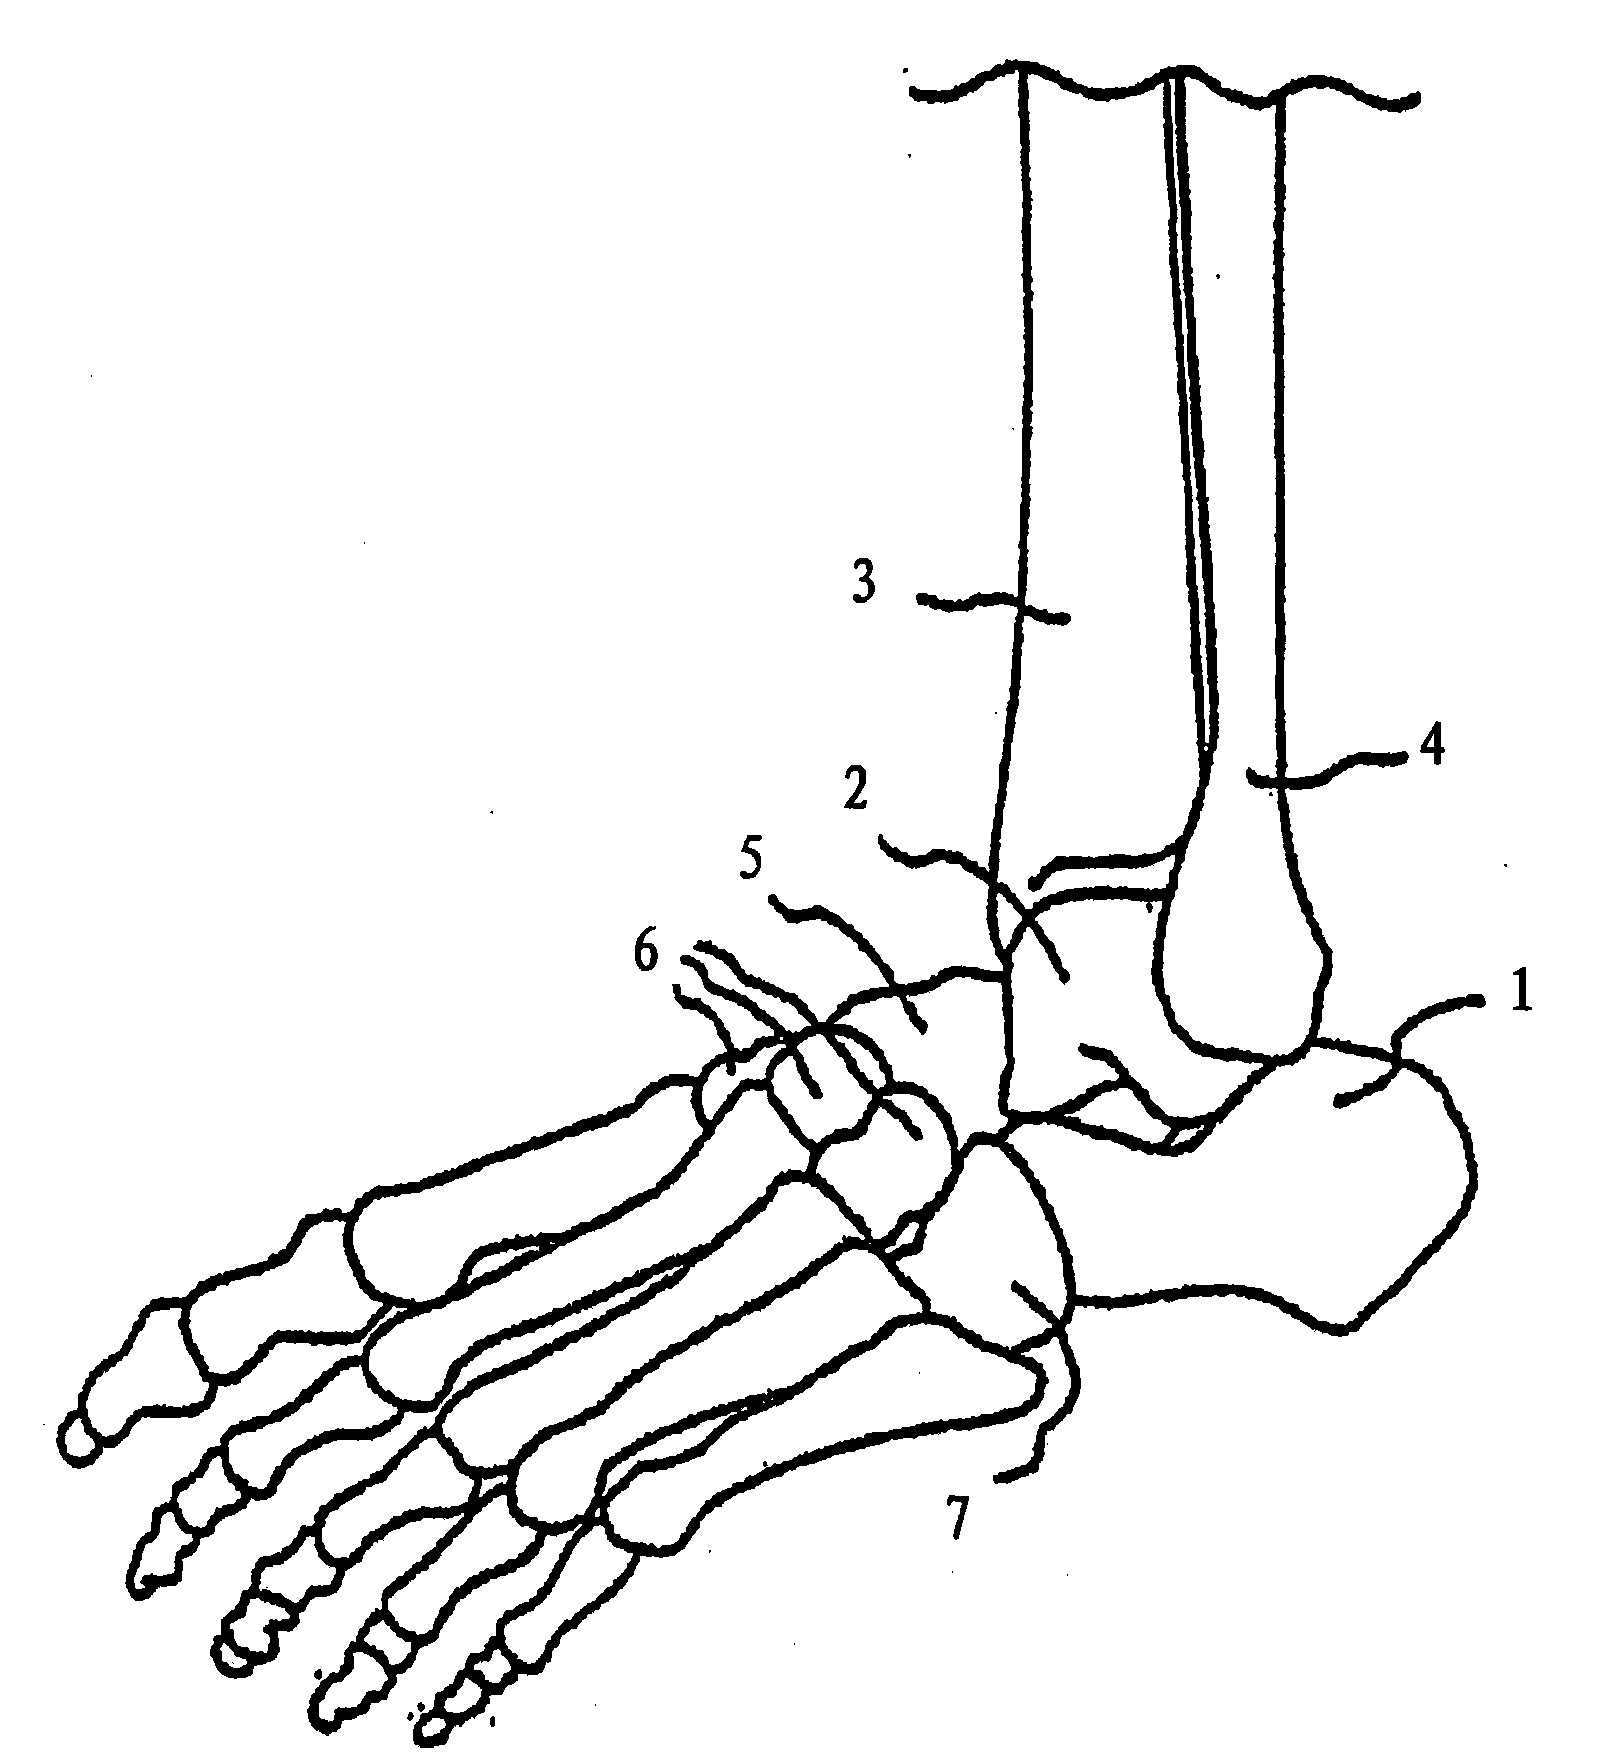 Bone nail for the heel and osteosynthesis suite